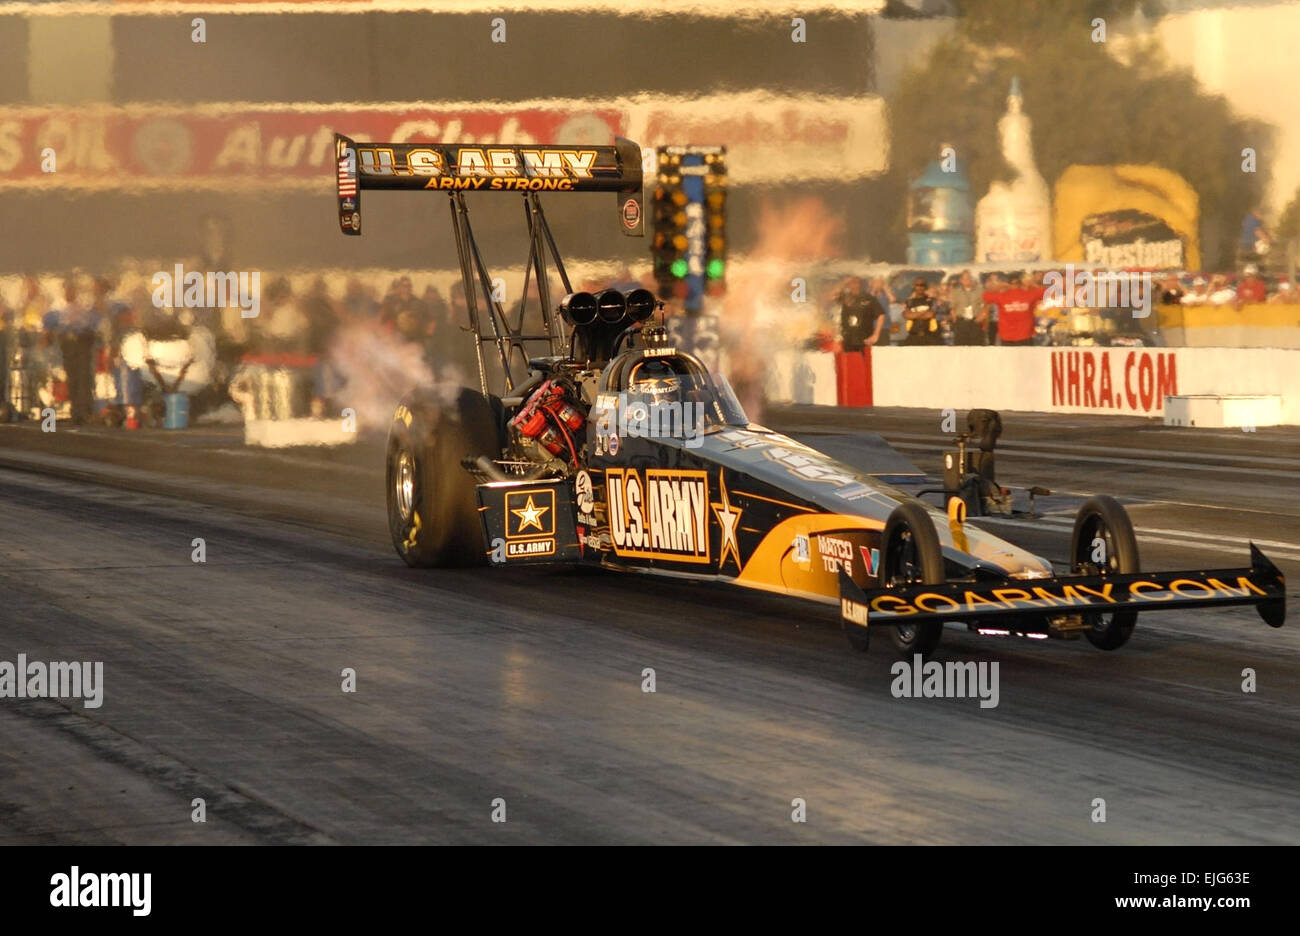 Tony “The Sarge” Schumacher, aboard his Army Top Fuel dragster, captured the Auto Club Finals in Pomona, Calif., Nov. 4 and took home his fourth consecutive NHRA POWERade World Championship.  U.S. Army Racing Stock Photo